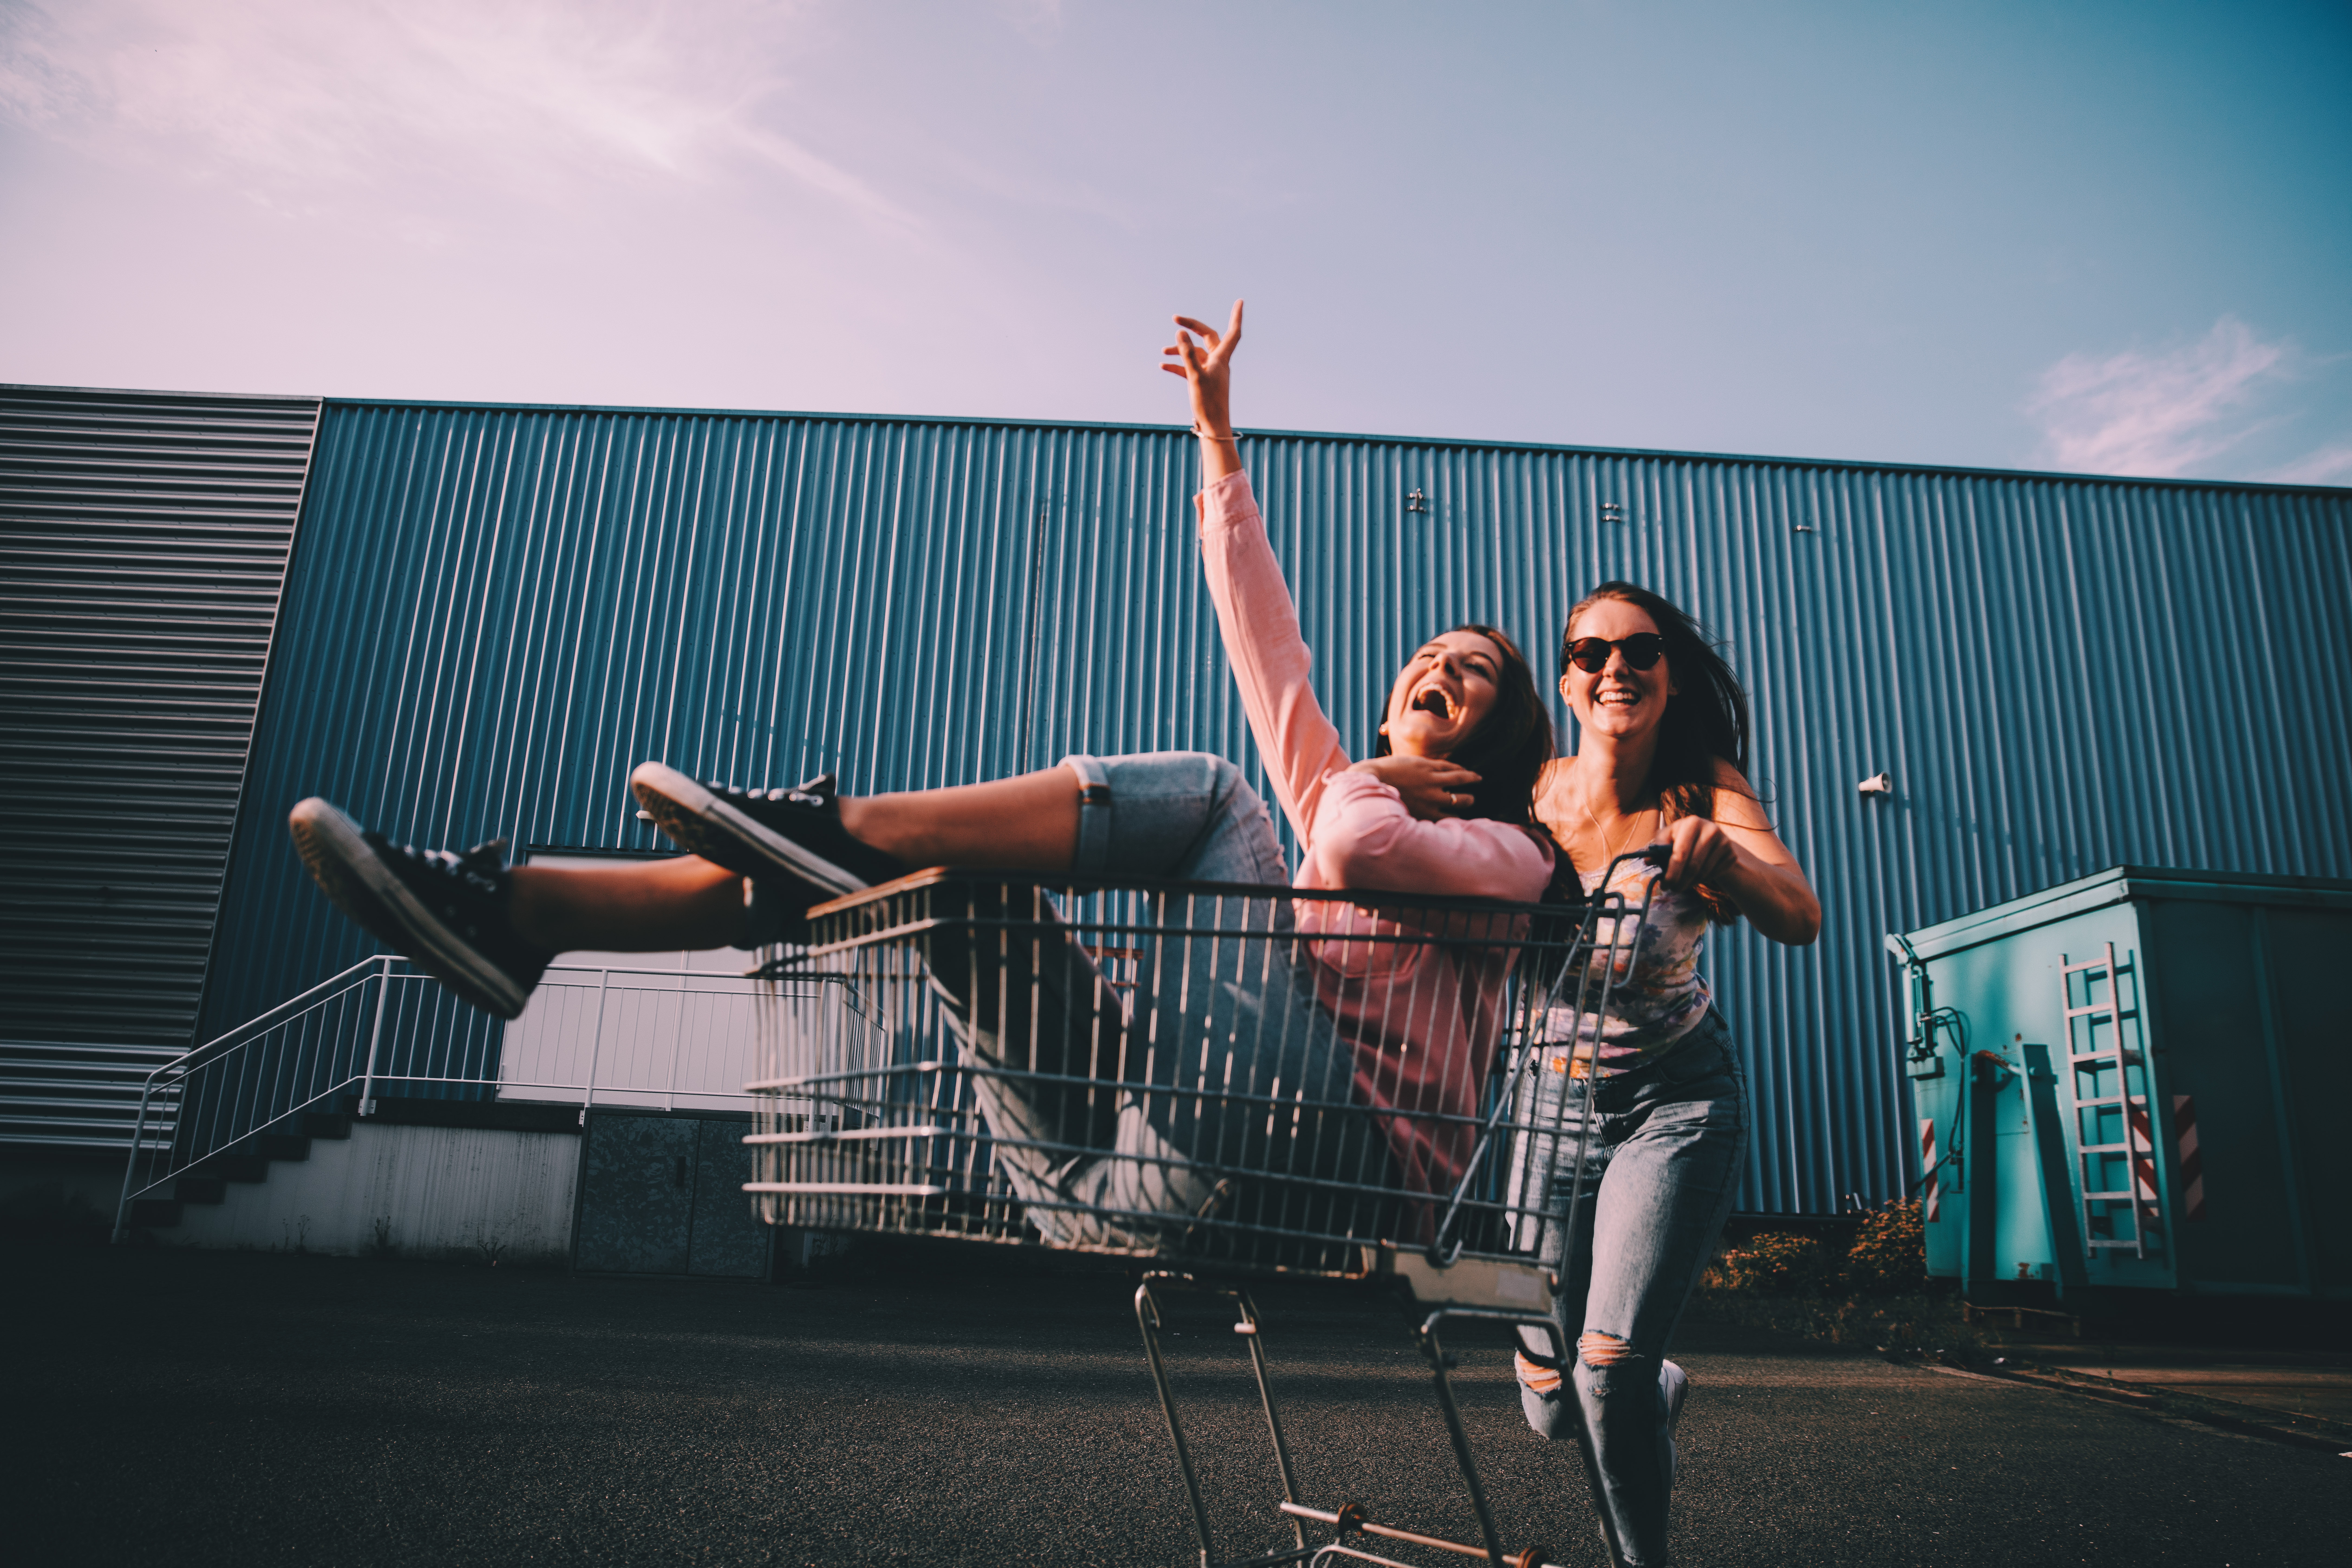 In a parking lot against a pale blue sky and dark blue metal wall, two young women laugh and smile while one sits inside of a shopping cart while the other pushes the cart.